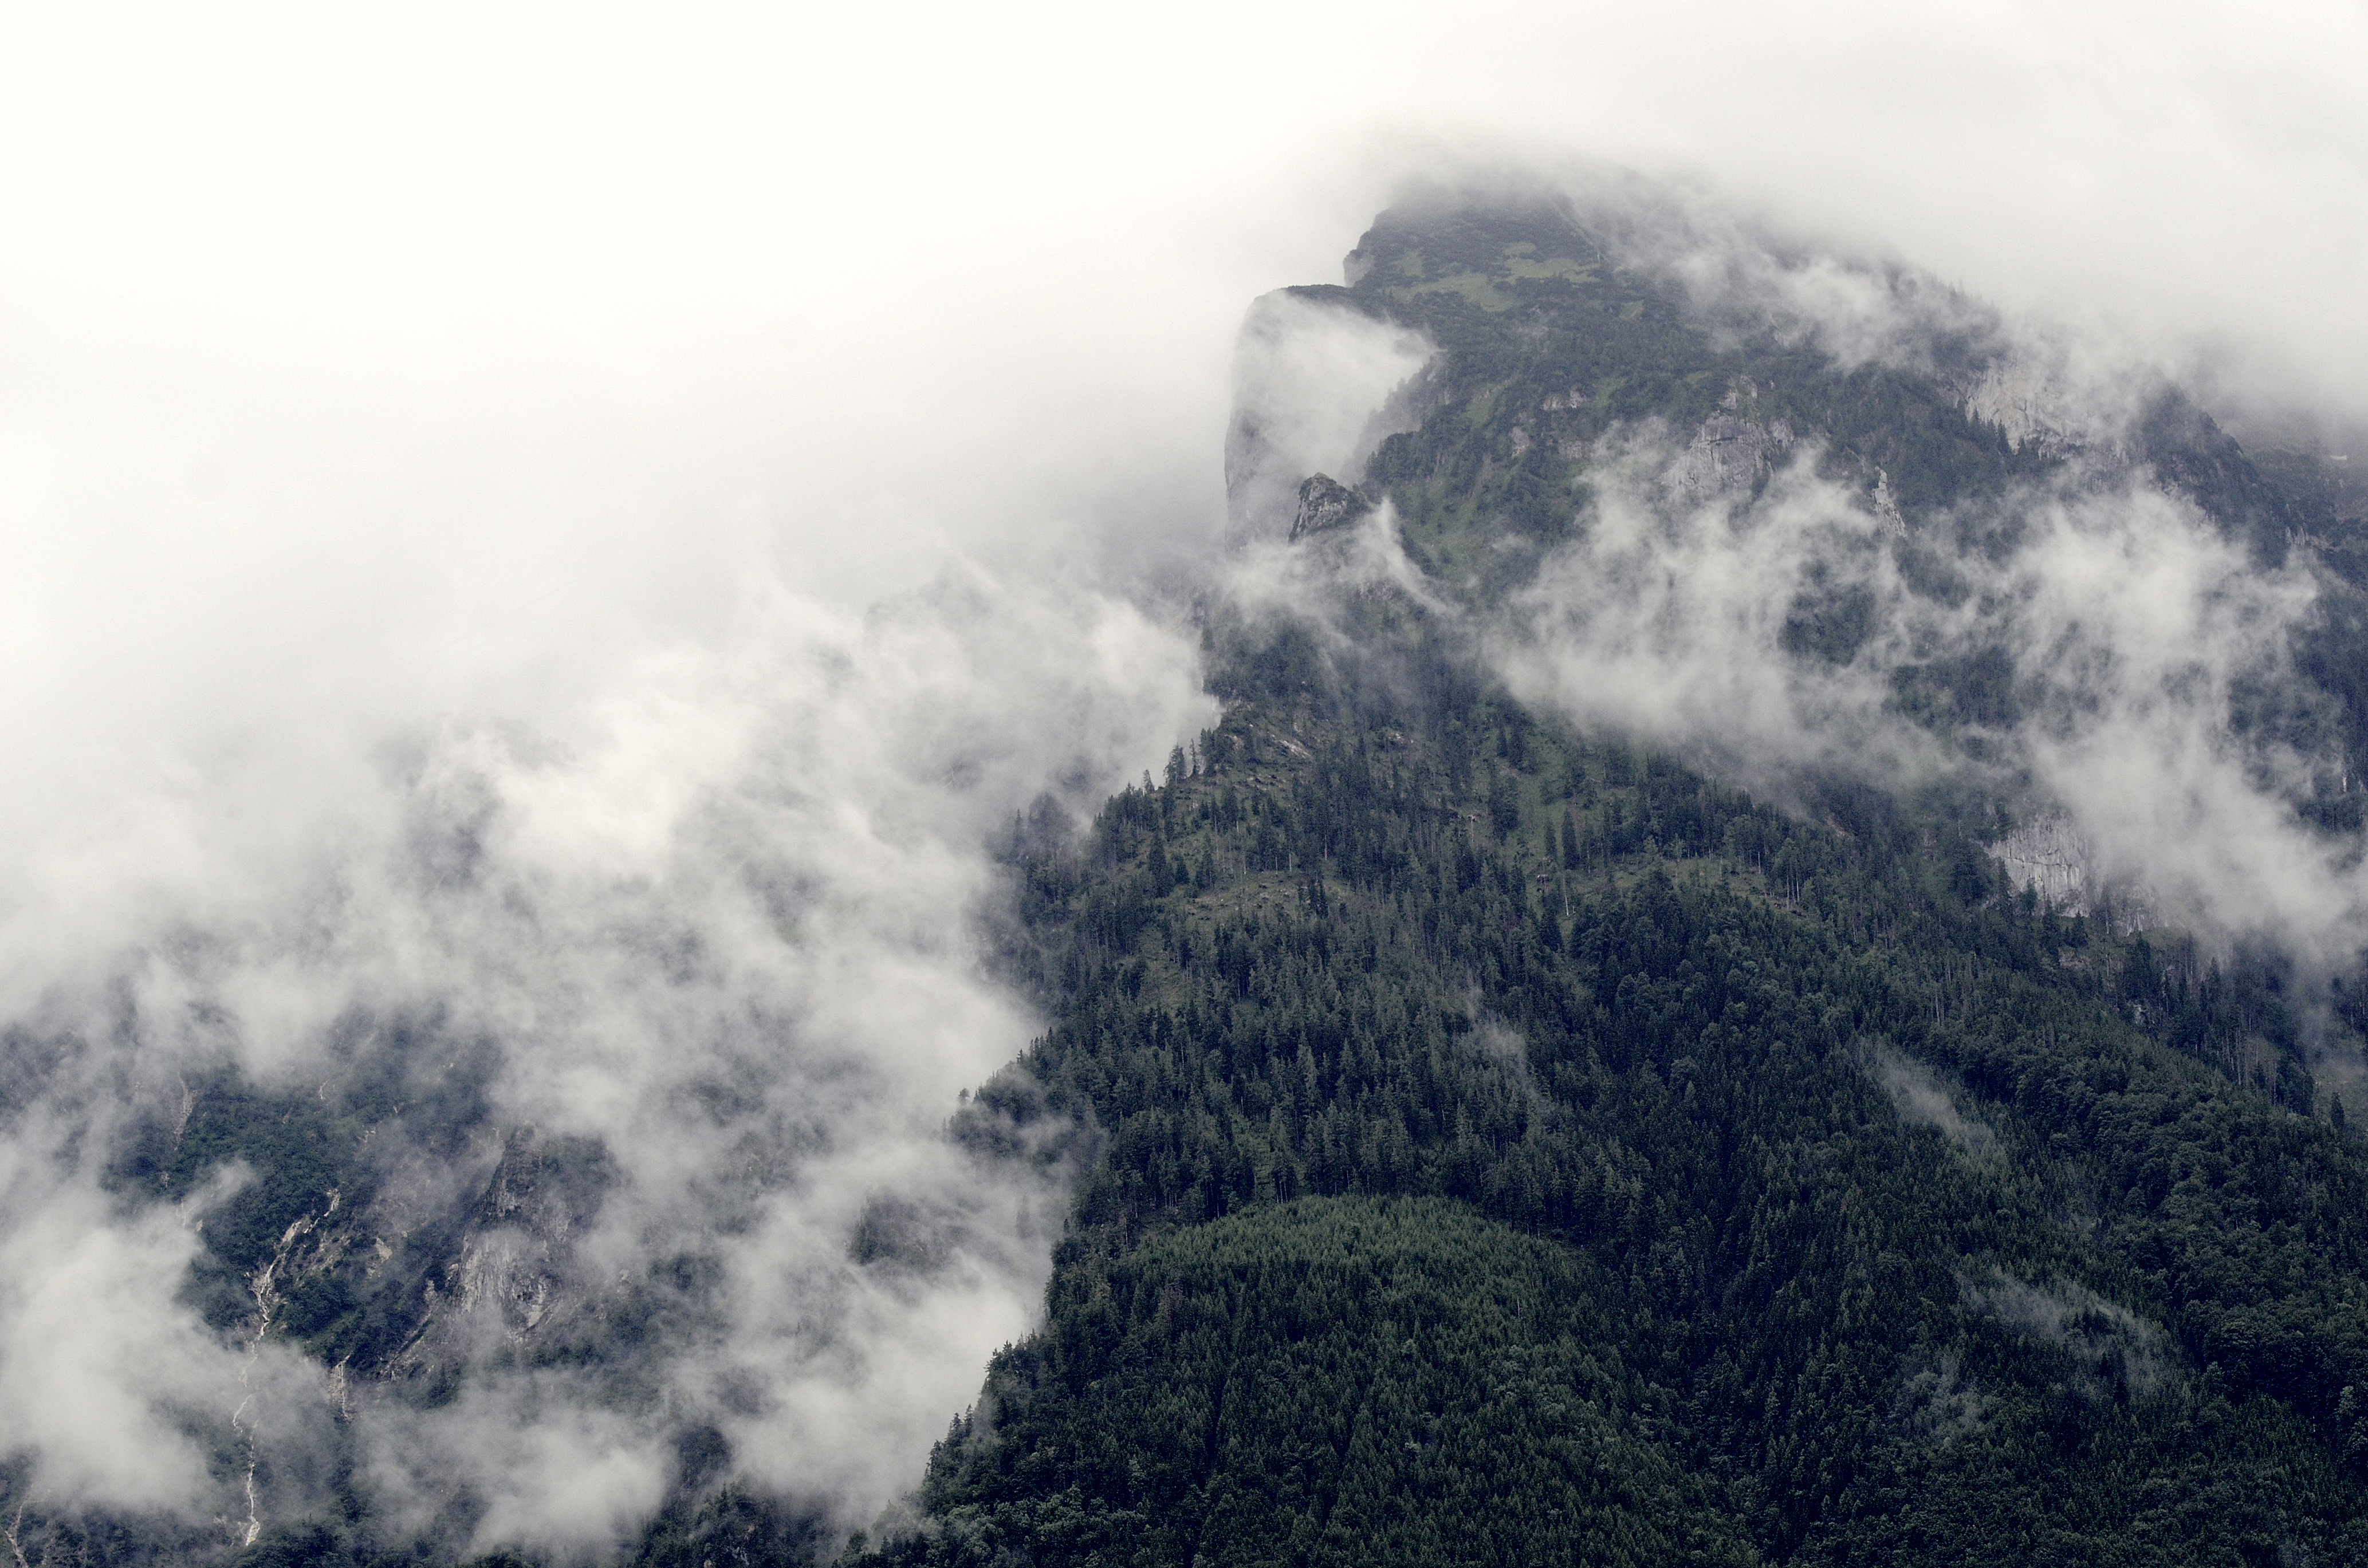 File:Clouds-cloudy-forest-mountain (24325592605).jpg - Wikimedia Commons